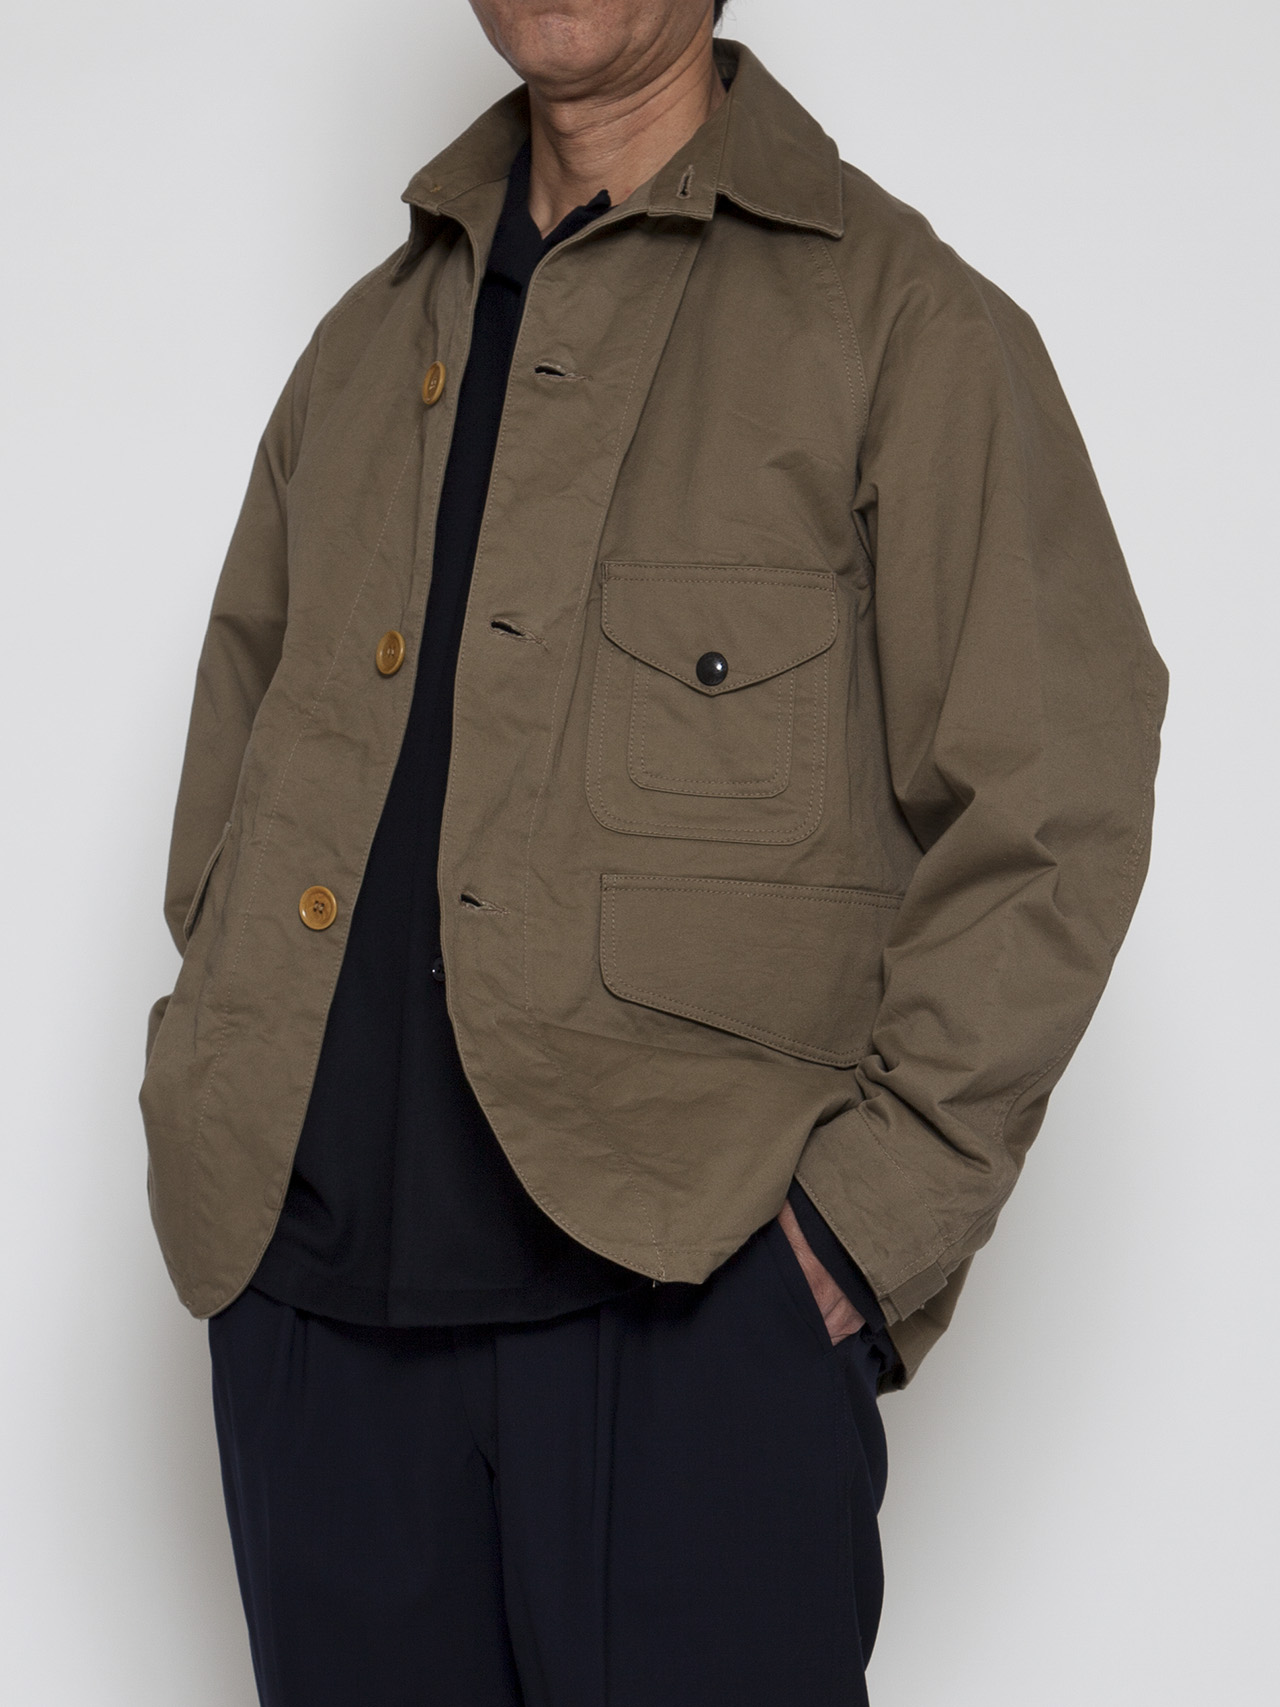 DELIVERY】CJ001L – CORONA GAME JACKET LIGHT | SPECIAL